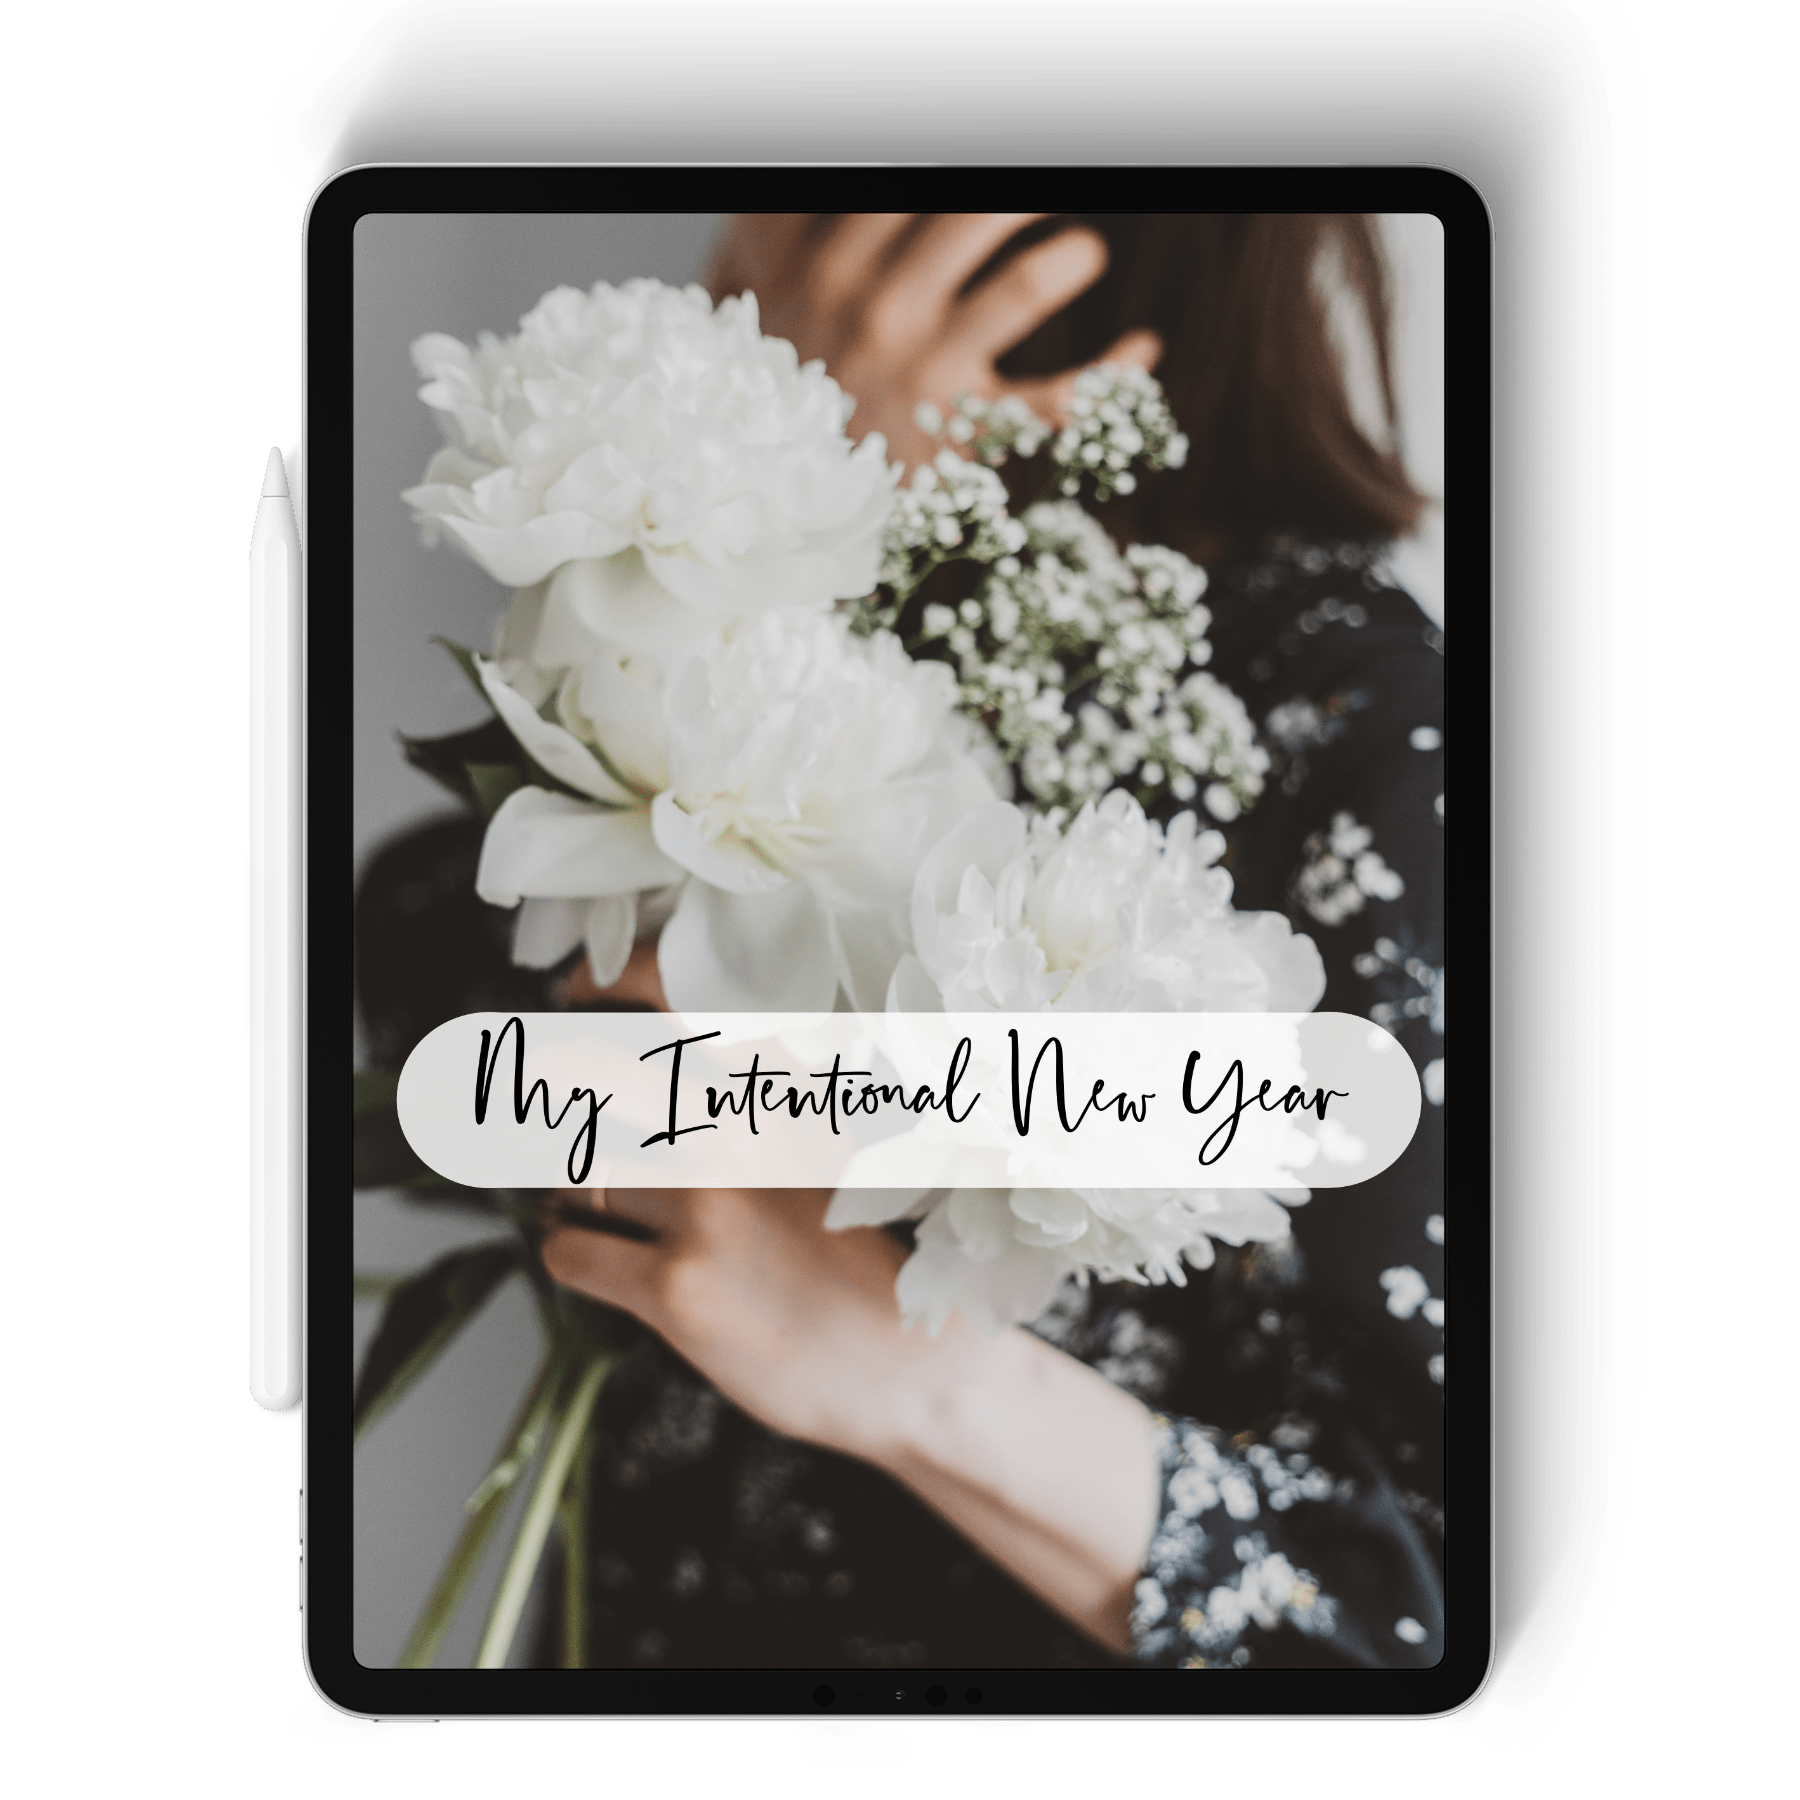 My Intentional Year Bundle